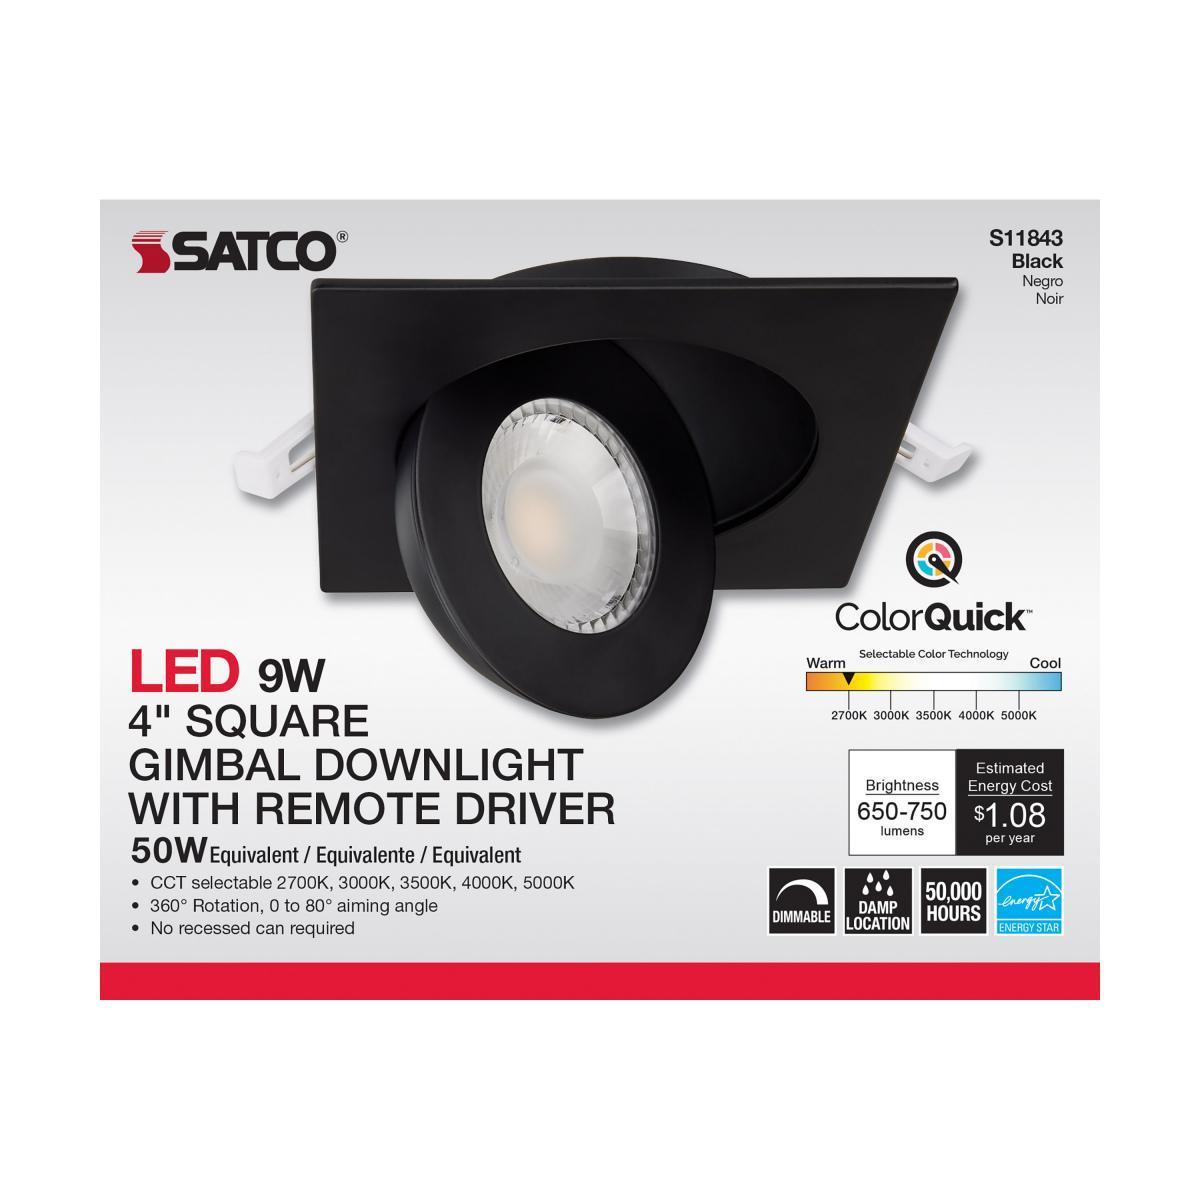 4 Inch Square Gimbal Downlight with Remote Driver, Square, 9 Watt, 750 Lumens, Selectable CCT, 2700K to 5000K, Remote Driver, Black Finish